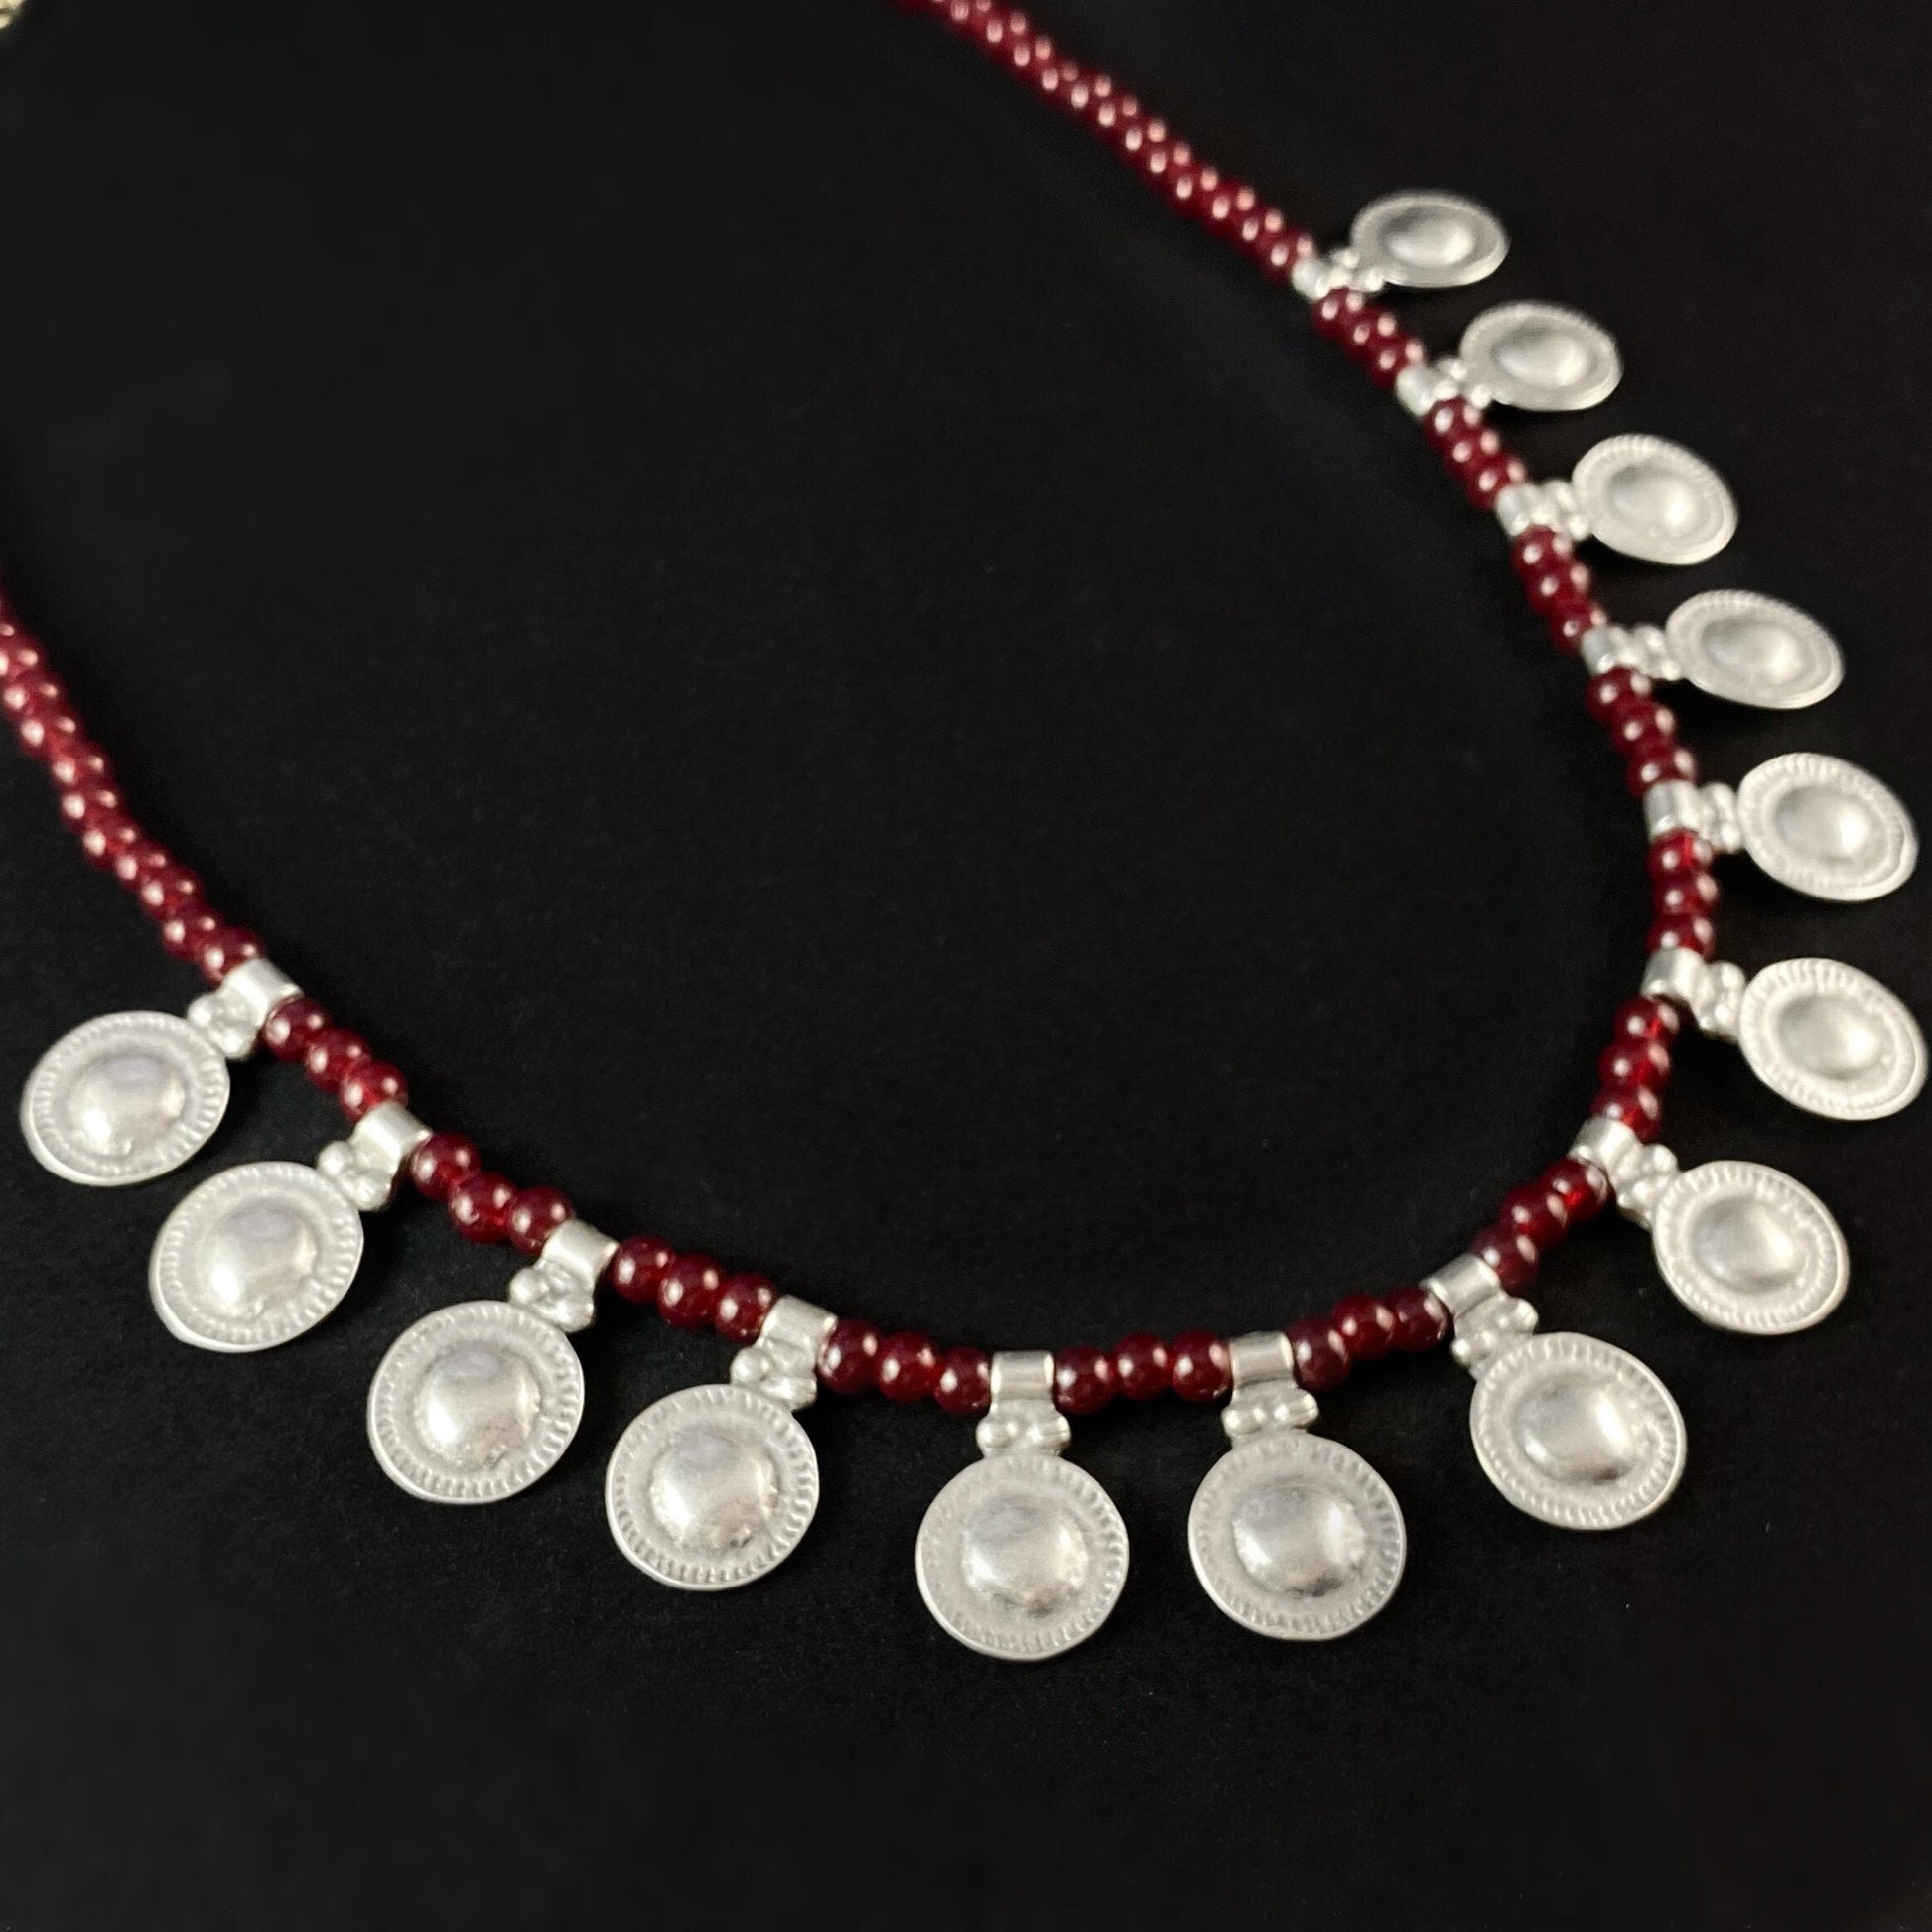 Silver Statement Necklace with Red Beads, Handmade, Nickel Free